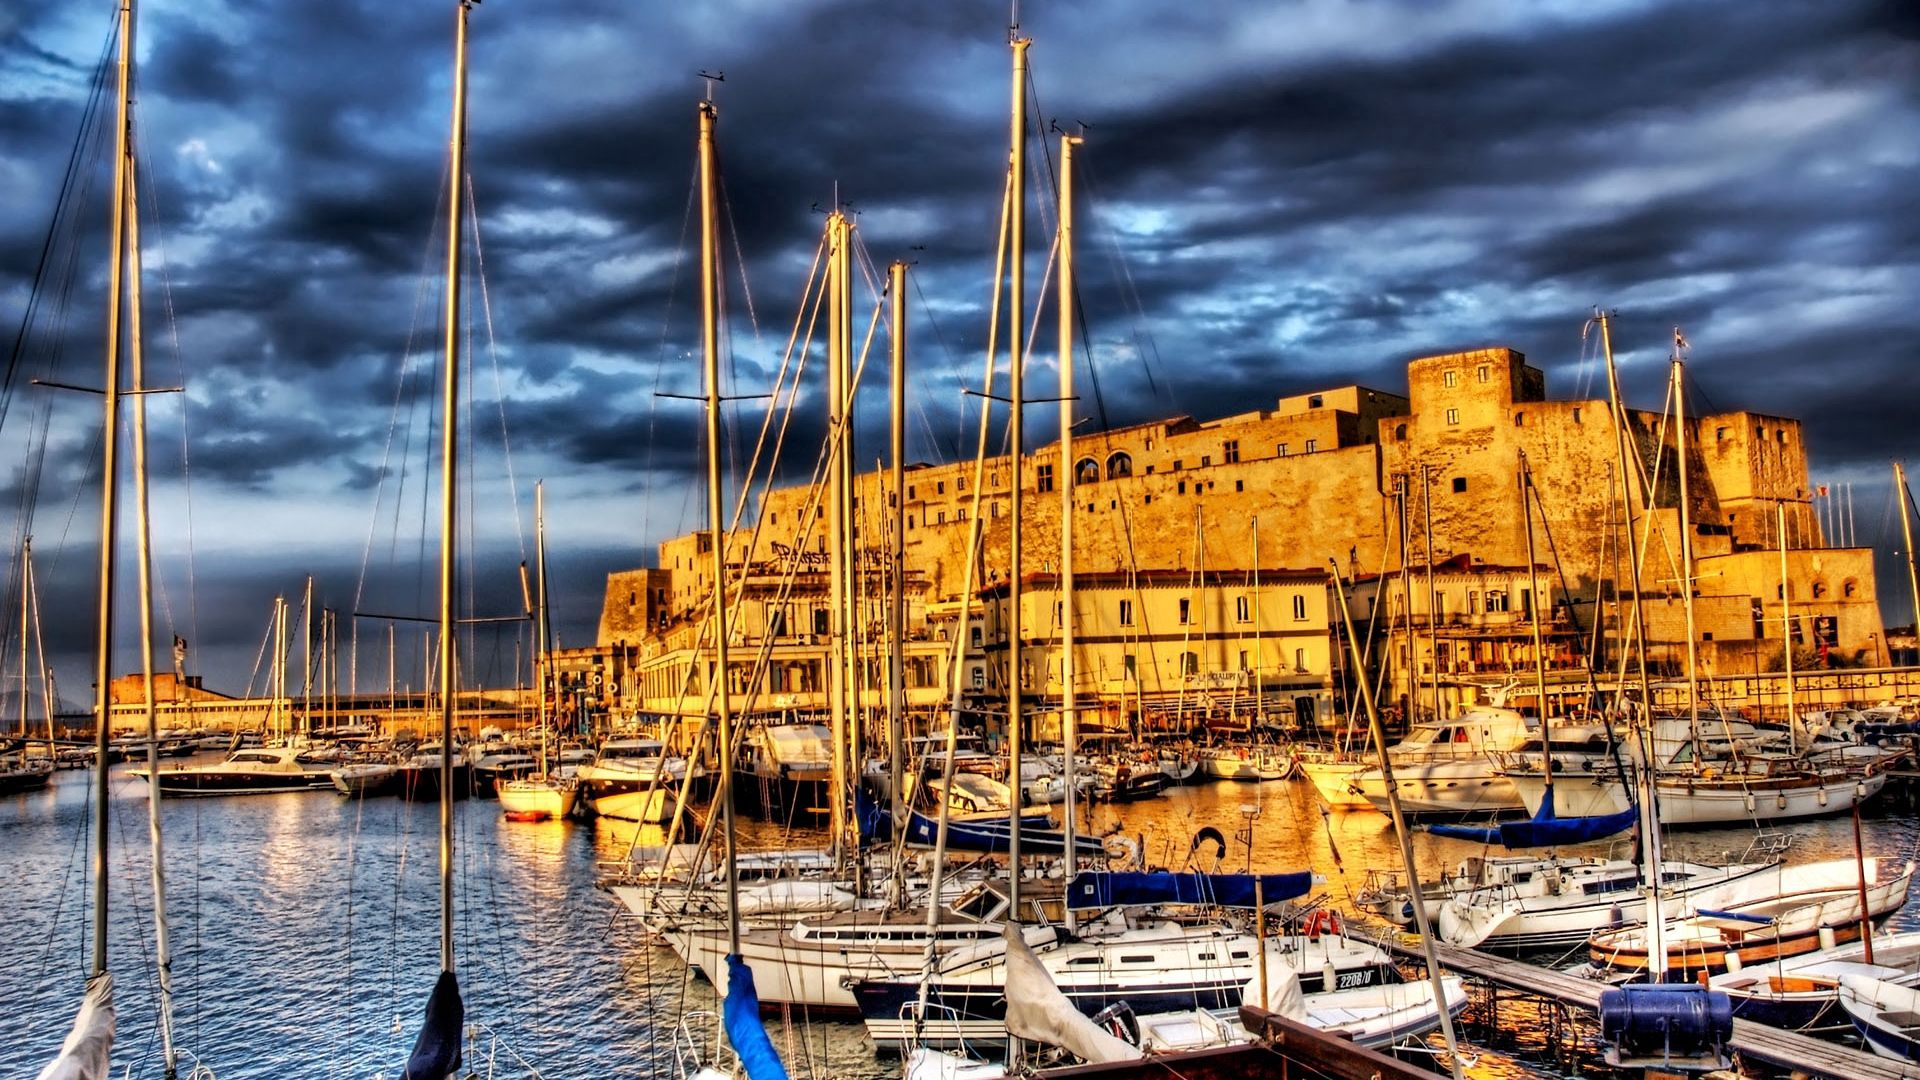 boats, cities, yachts, building, pier, france, hdr, terra minor phone background